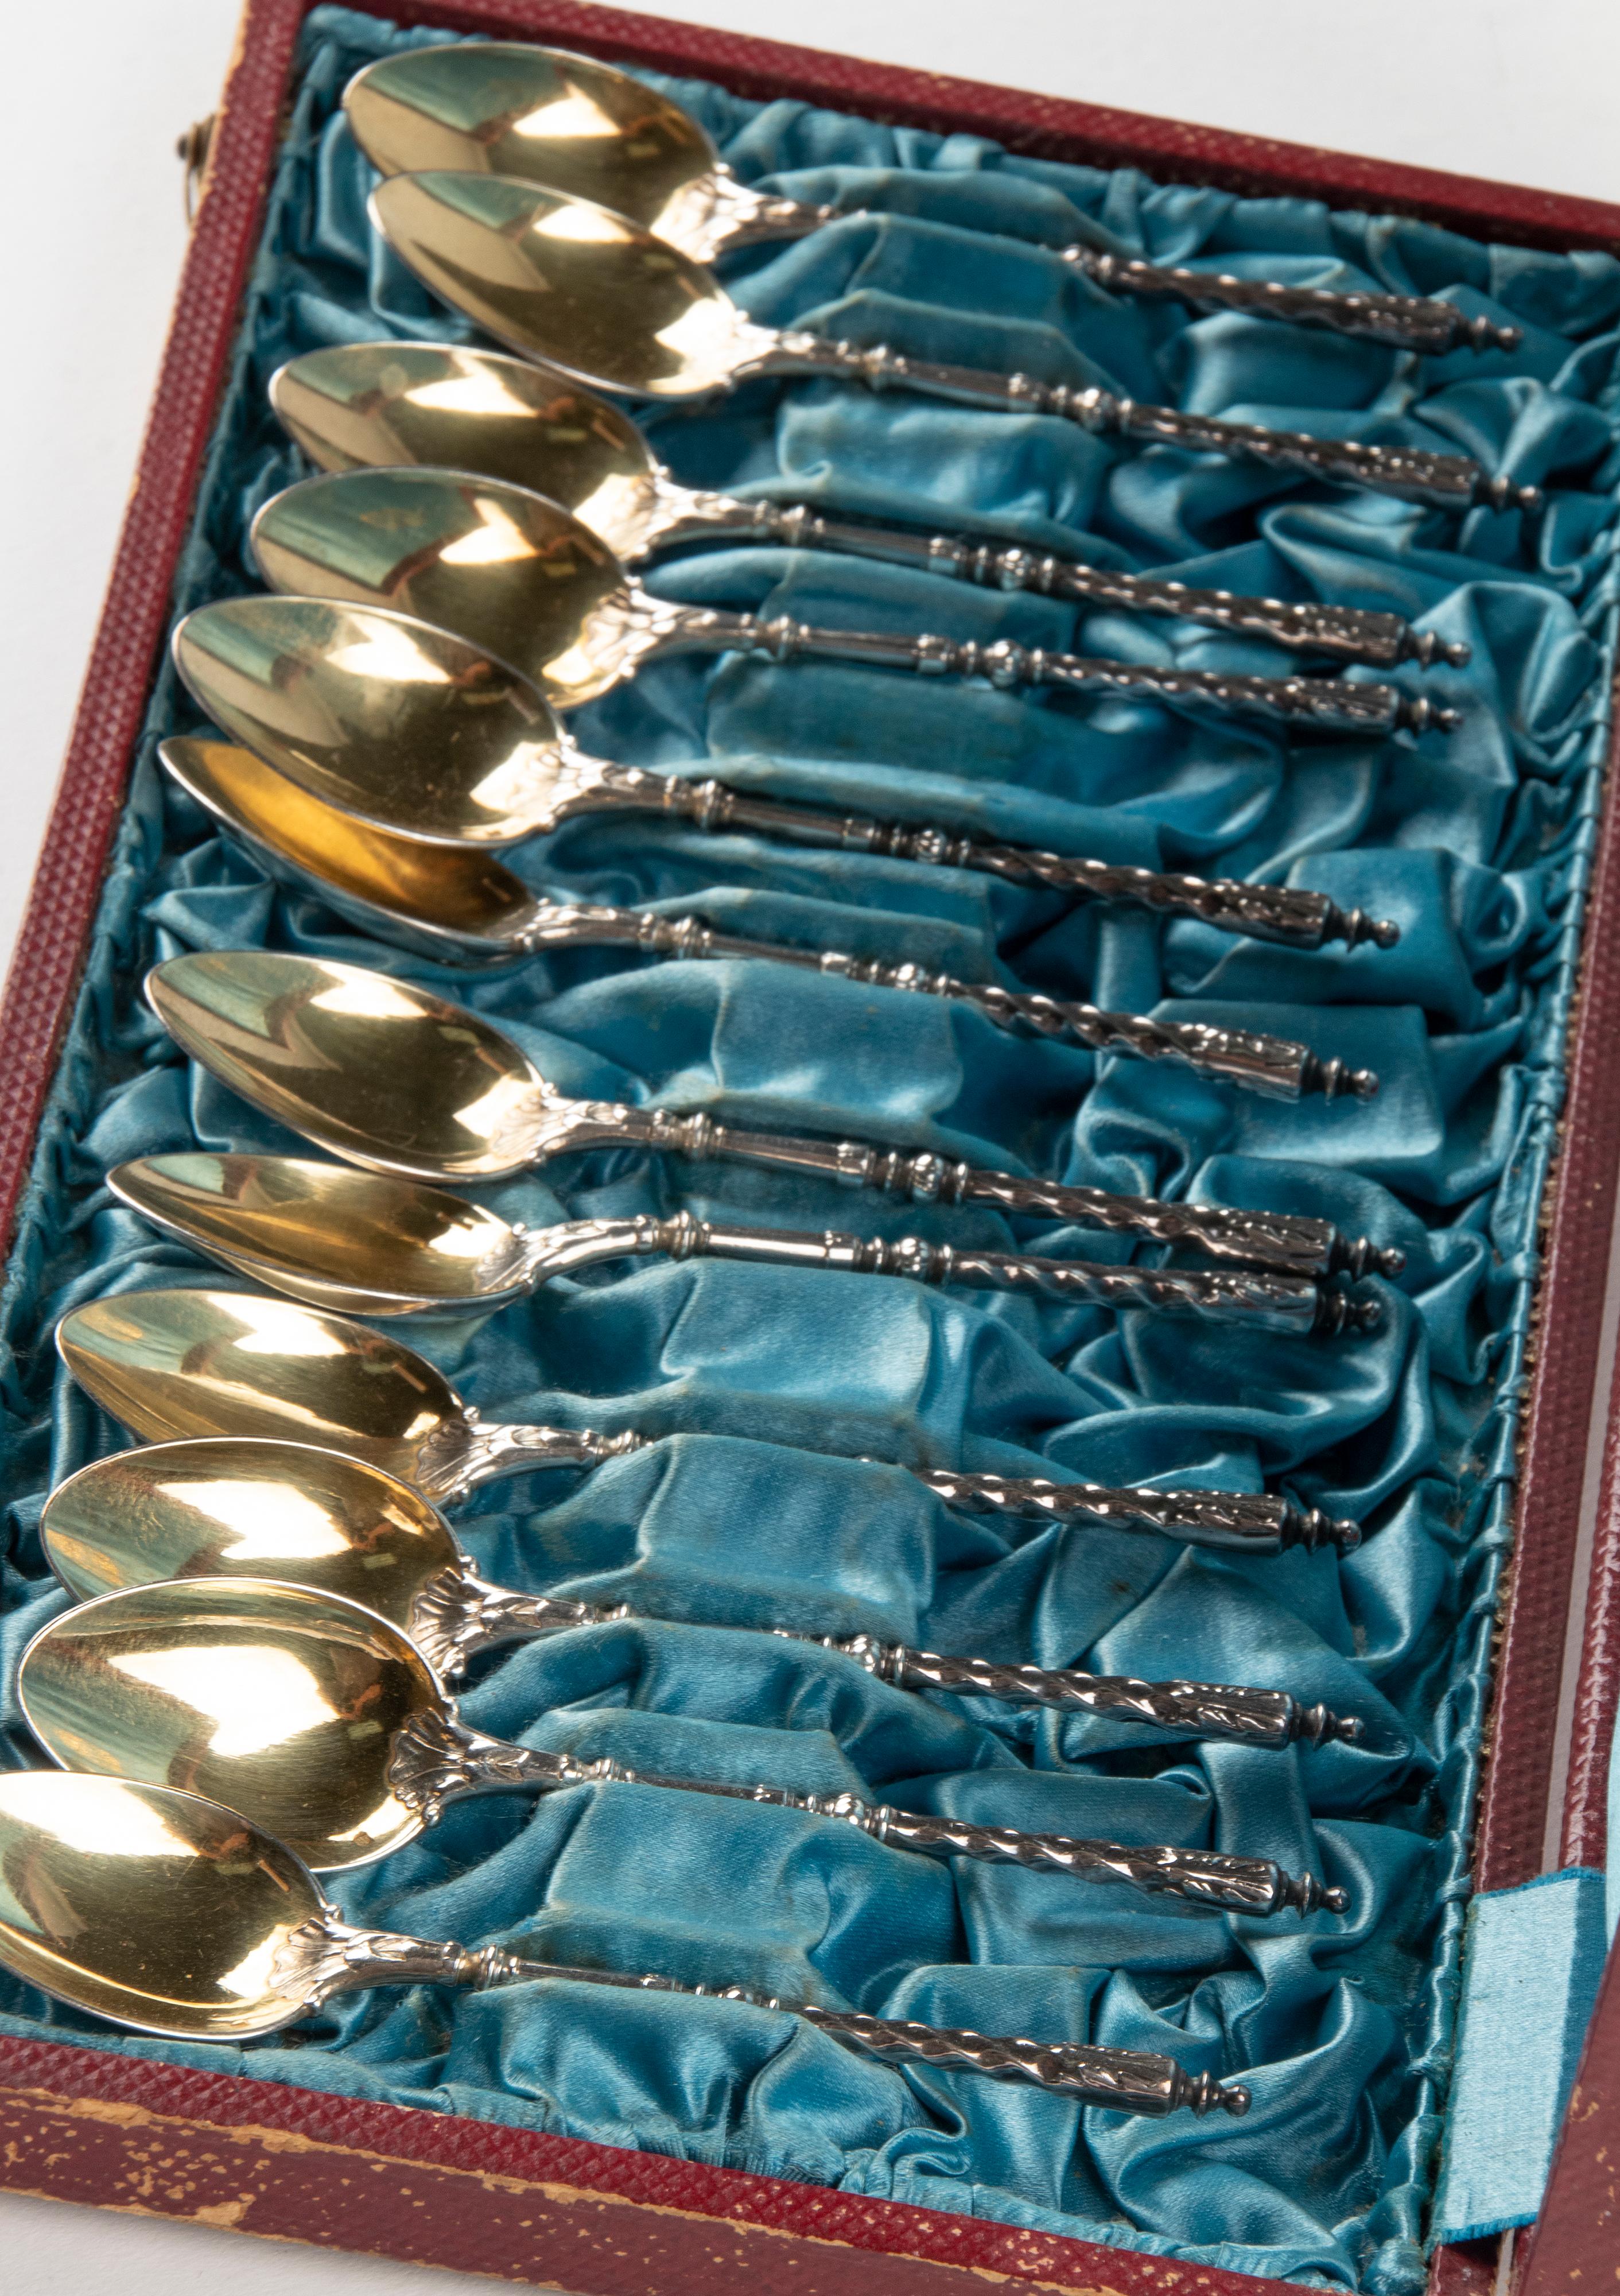 Set of 12 Antique Silver-Plated and Gilded Tea spoons made by Christofle For Sale 3